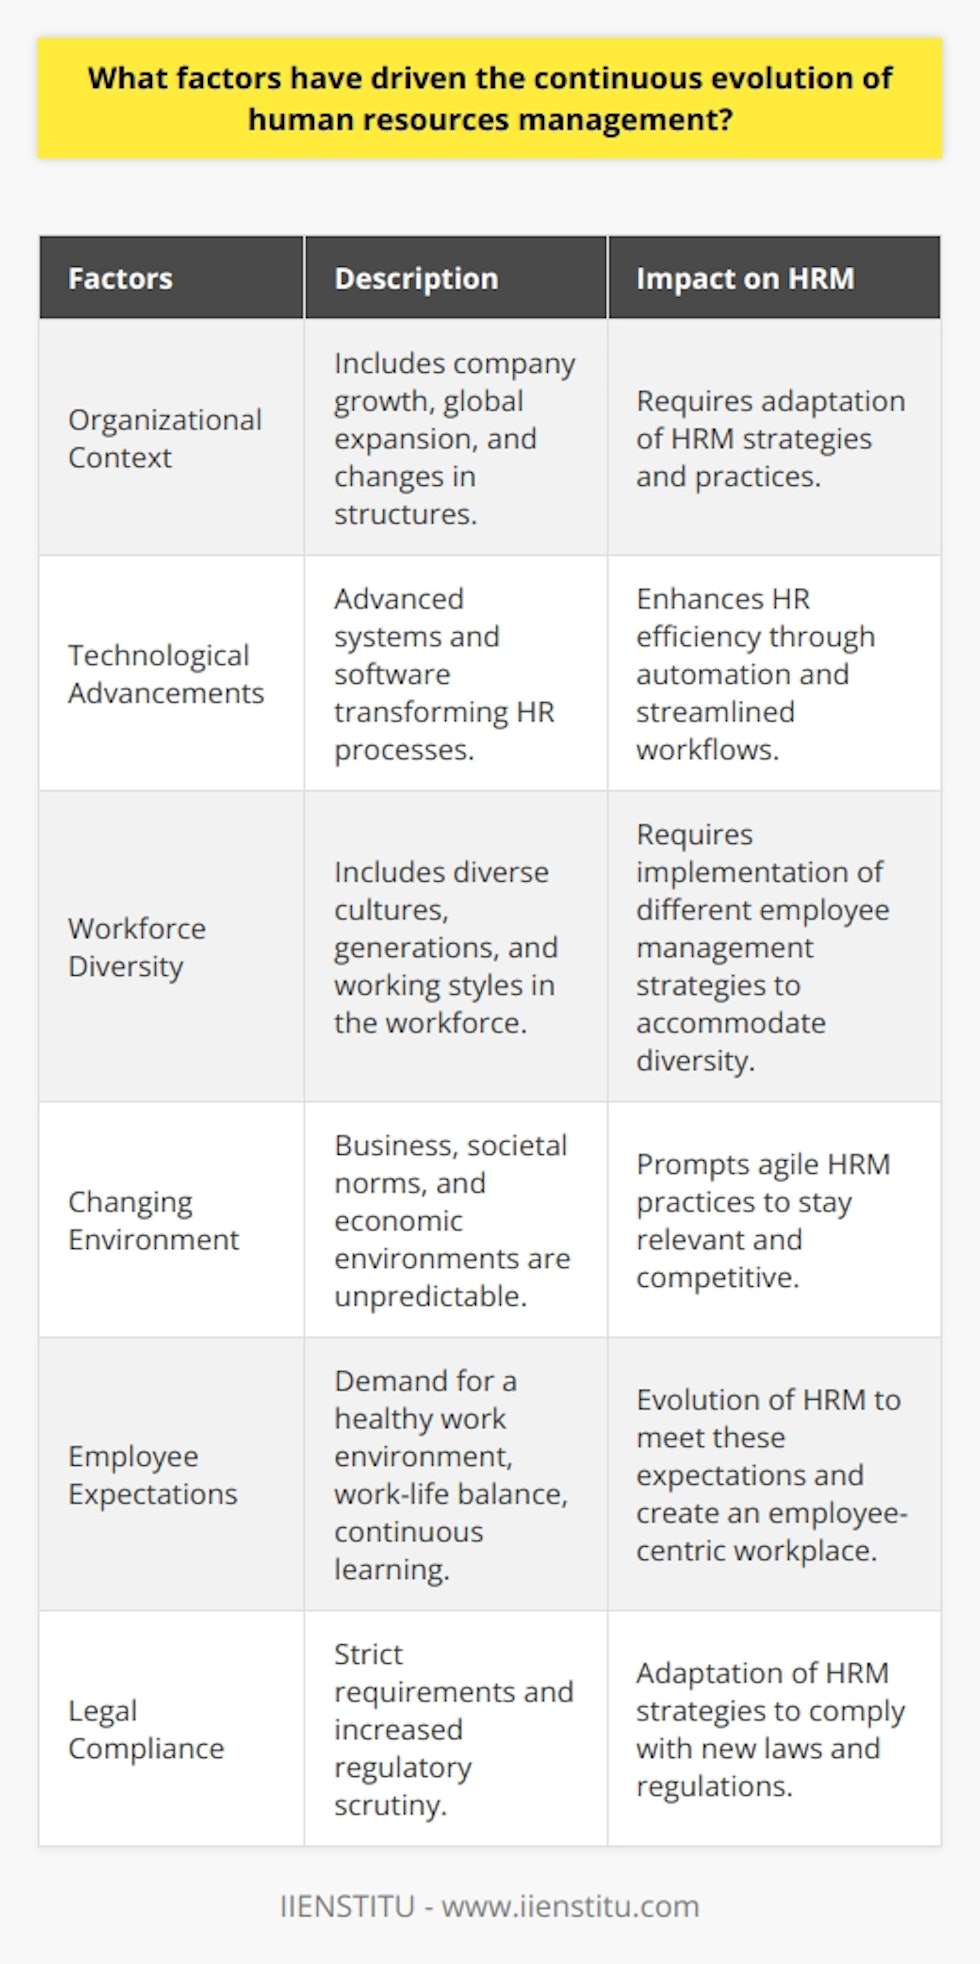 Human resource management (HRM) has continuously evolved over time due to various factors. These include the organizational context, technological advancements, workforce diversity, the changing environment, employee expectations, and legal compliance.The organizational context plays a significant role in HRM evolution. As companies grow and expand globally, their HRM practices need to adapt accordingly. Changes in organizational structures also drive the need for different HRM strategies.Technology has greatly influenced the evolution of HRM. Advanced systems and software have transformed HR processes such as recruitment, training, and performance management. Automation of repetitive tasks and streamlined workflows enhance HR efficiency.Workforce diversity is another driver of HRM evolution. With a diverse workforce, organizations need to implement different employee management strategies. HRM practices must accommodate various cultures, generations, and working styles prevalent in today's diverse workforce.The changing environment also prompts HRM to evolve continually. Business, societal norms, and economic environments are unpredictable and require HRM to be agile. Adapting to these changes is necessary for organizations to stay relevant and competitive.Employee expectations have also played a significant role in HRM evolution. Employees now demand a healthy work environment, better work-life balance, and continuous learning opportunities. HRM must evolve to meet these expectations and create an employee-centric workplace.Legal compliance is a crucial driver of HRM evolution. Strict requirements and increased regulatory scrutiny necessitate HRM to adapt to new laws and regulations. Non-compliance can lead to hefty penalties and negative publicity for organizations.In conclusion, HRM must continuously evolve to meet changing organizational needs, technological advancements, workforce diversity, the shifting environment, evolving employee expectations, and legal compliance. Understanding these drivers is vital to steer HRM in the right direction and build more resilient and competitive organizations.